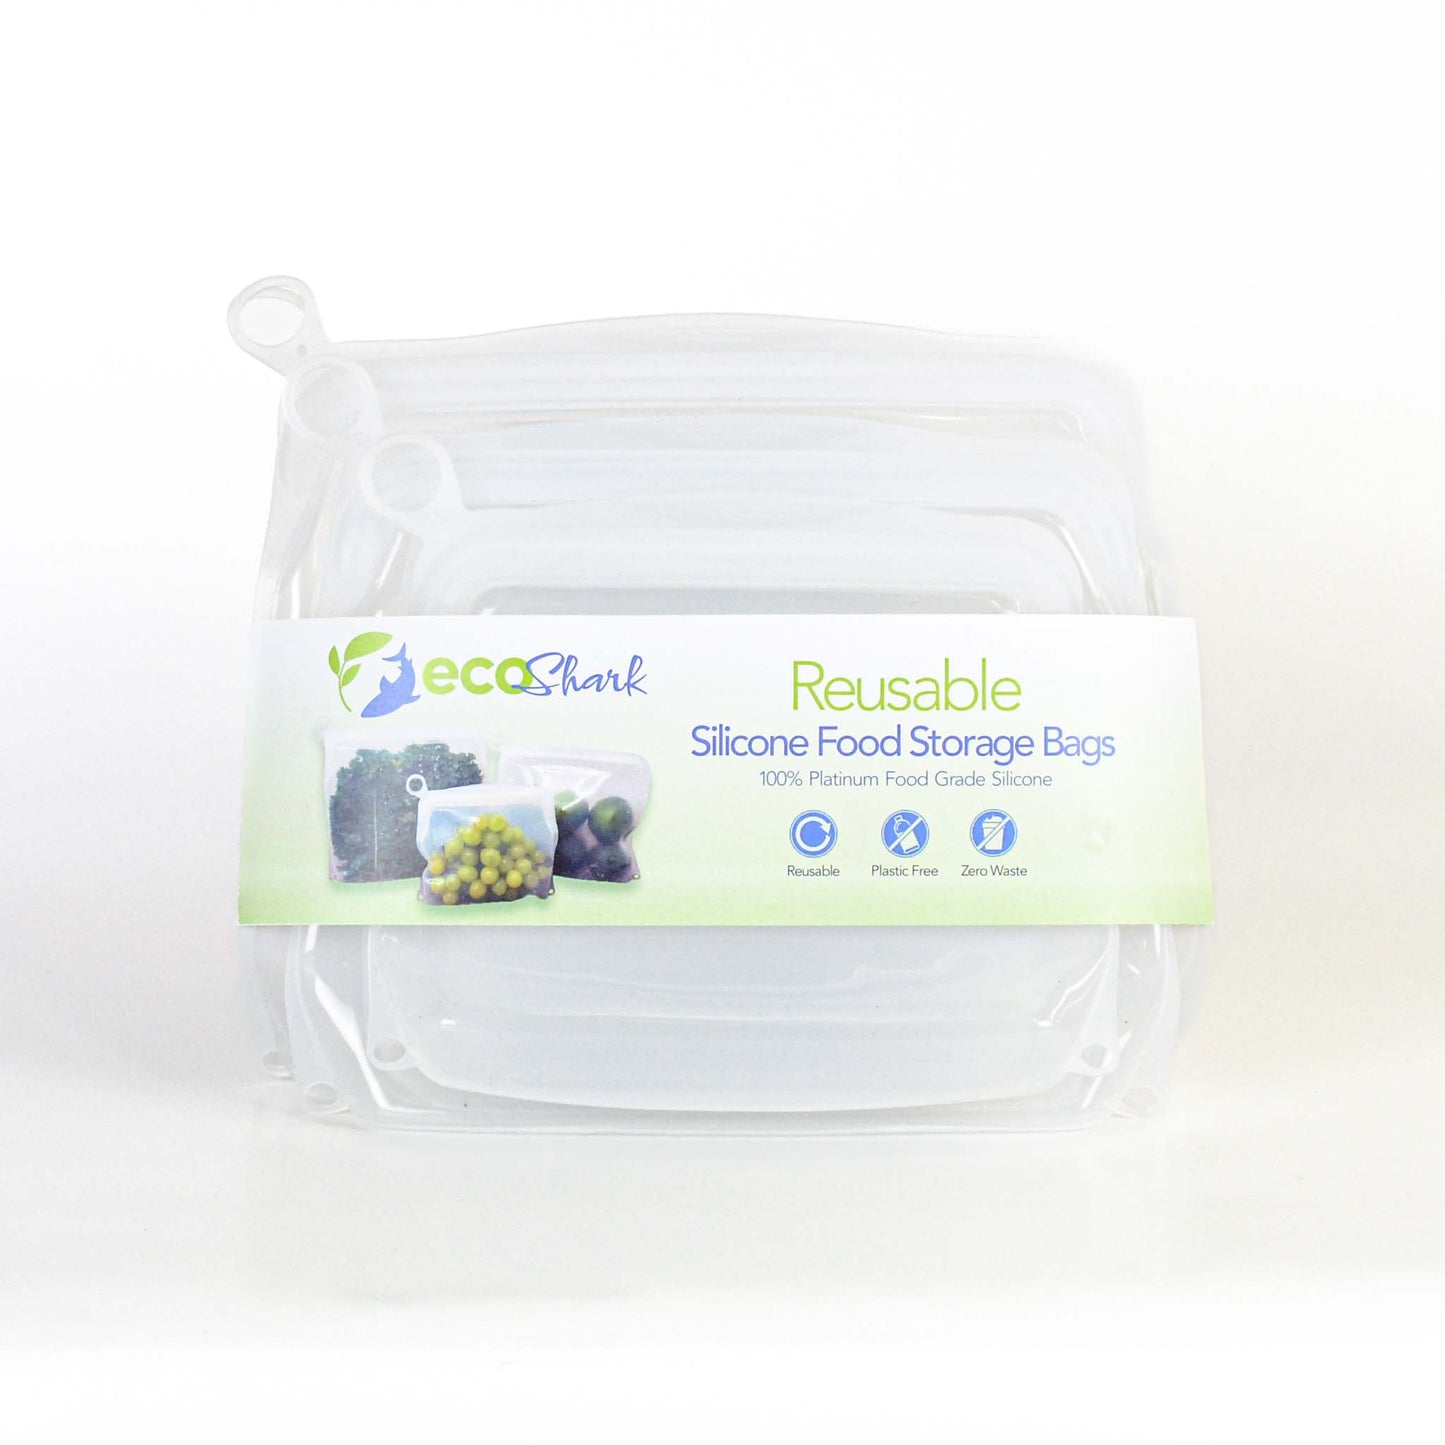 Reusable Silicone Food Storage Bags 3 sizes